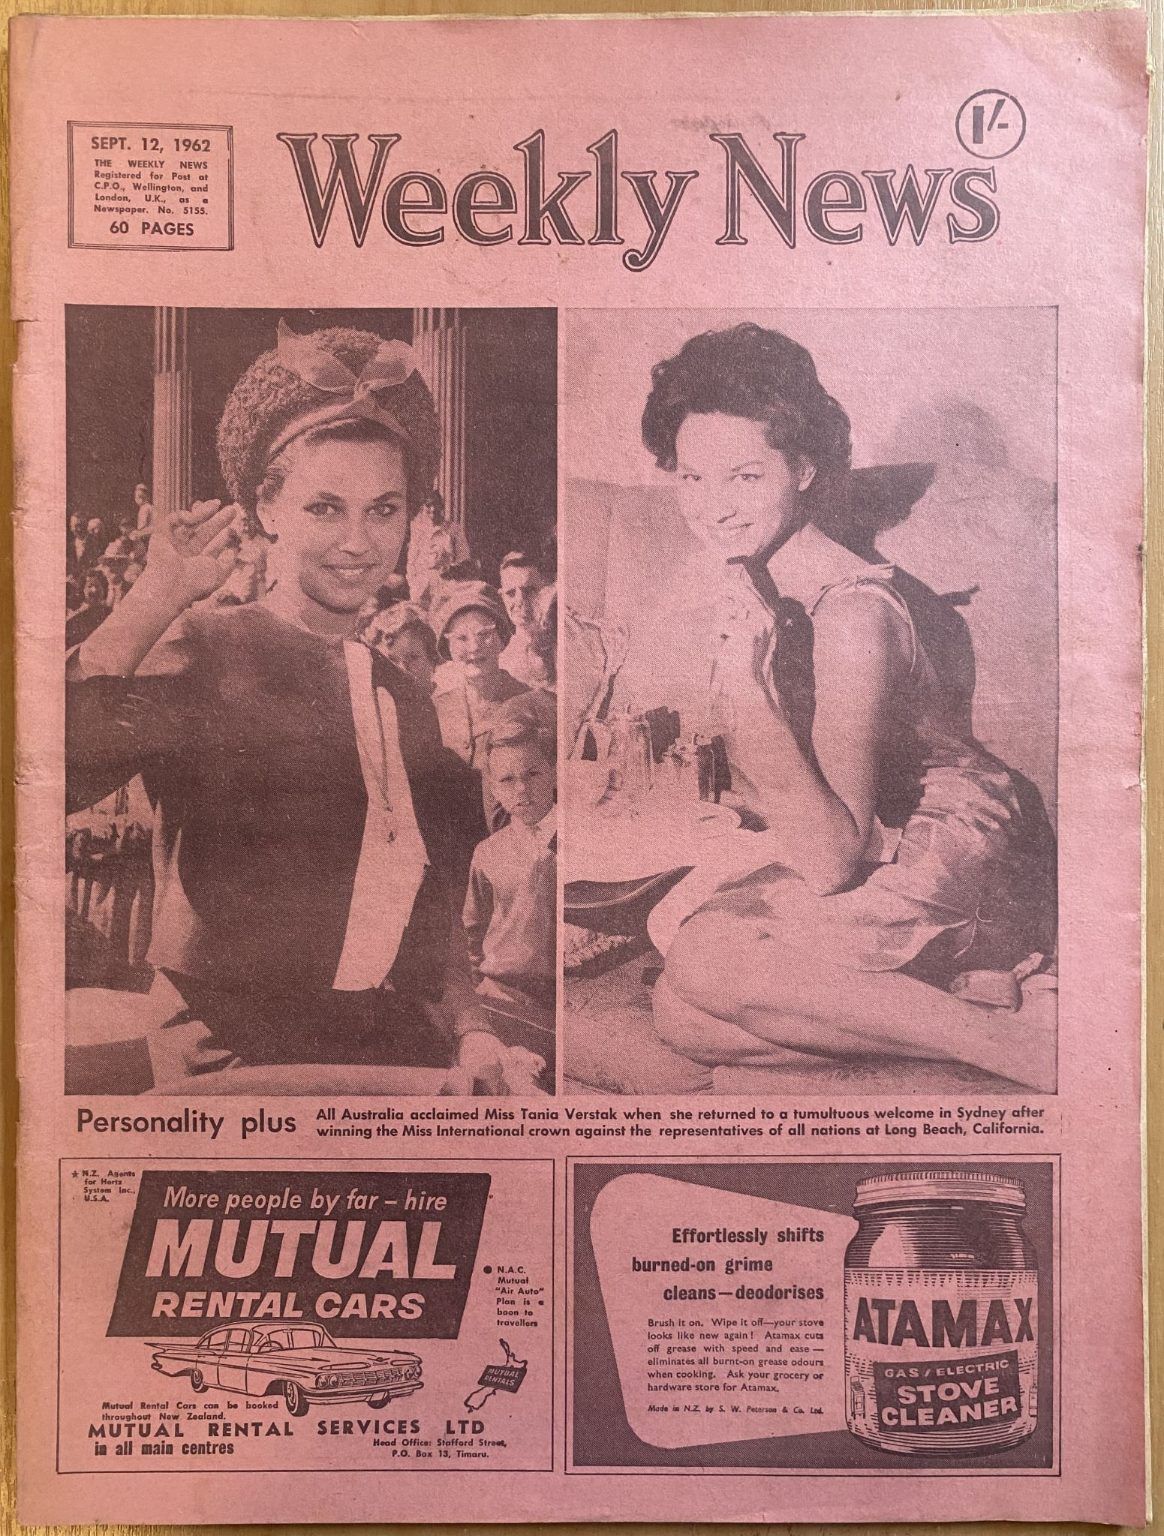 OLD NEWSPAPER: The Weekly News, No. 5155, 12 September 1962